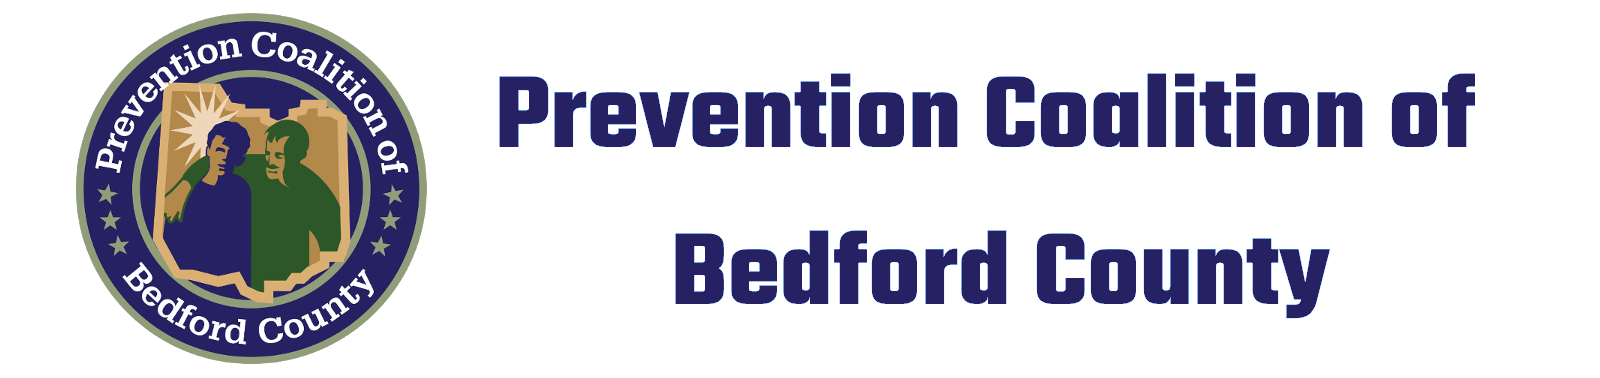 Prevention Coalition of Bedford County